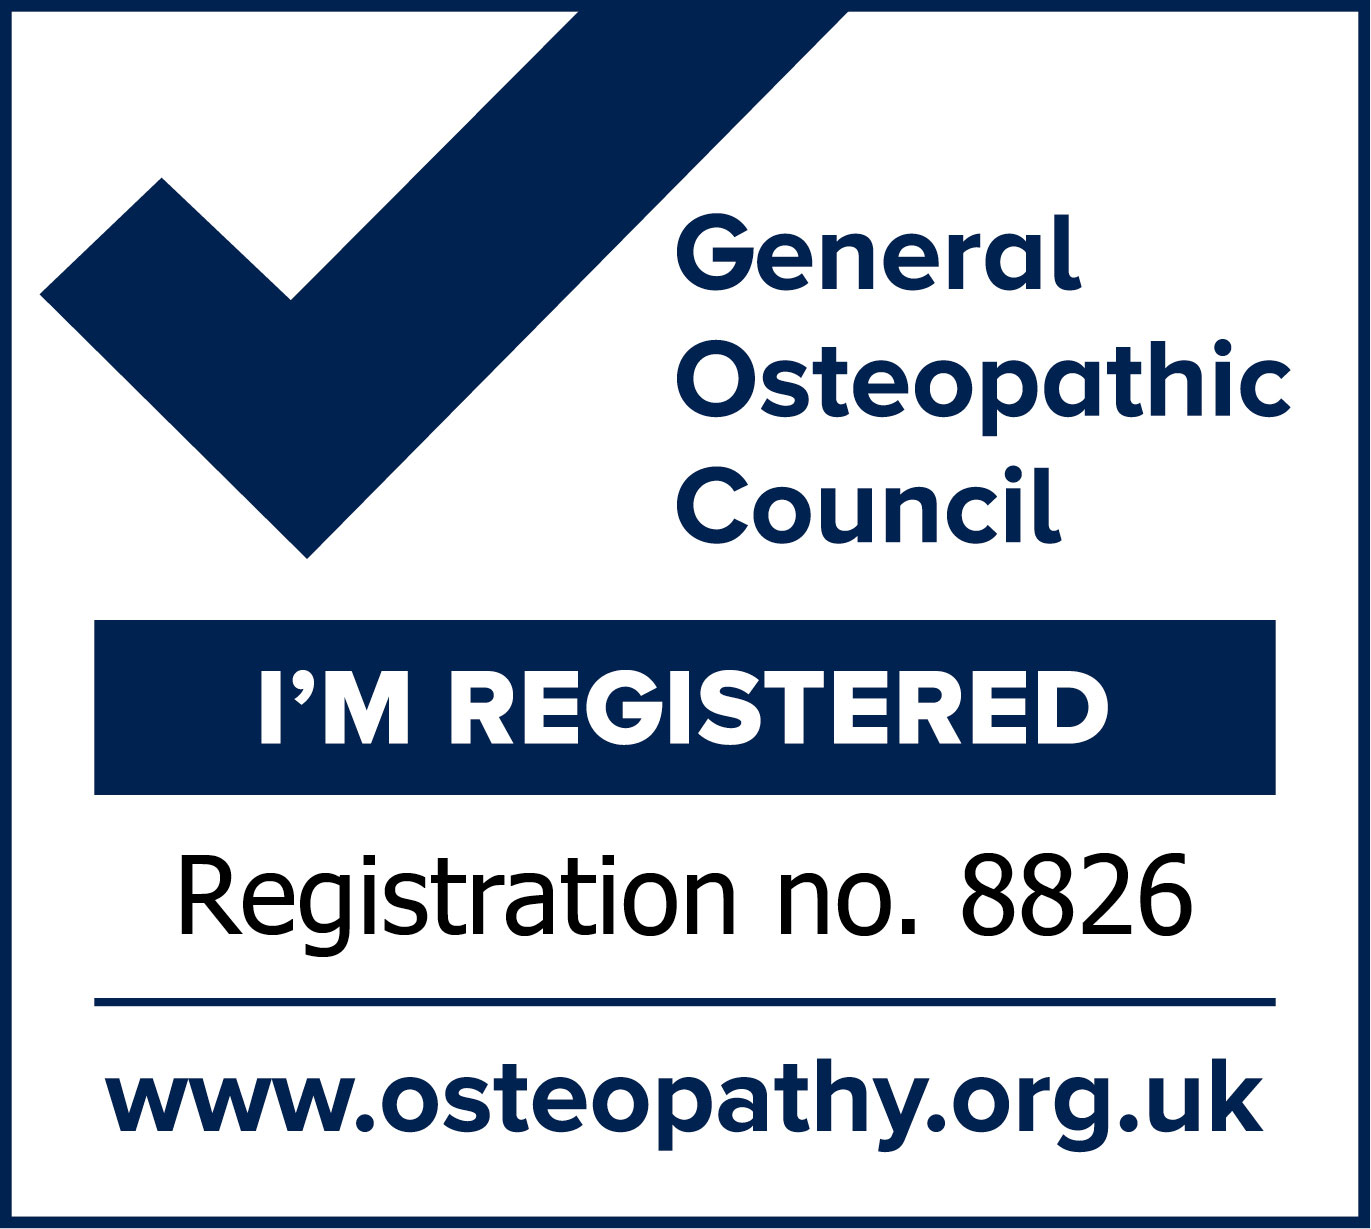 Member of General Osteopathic Council